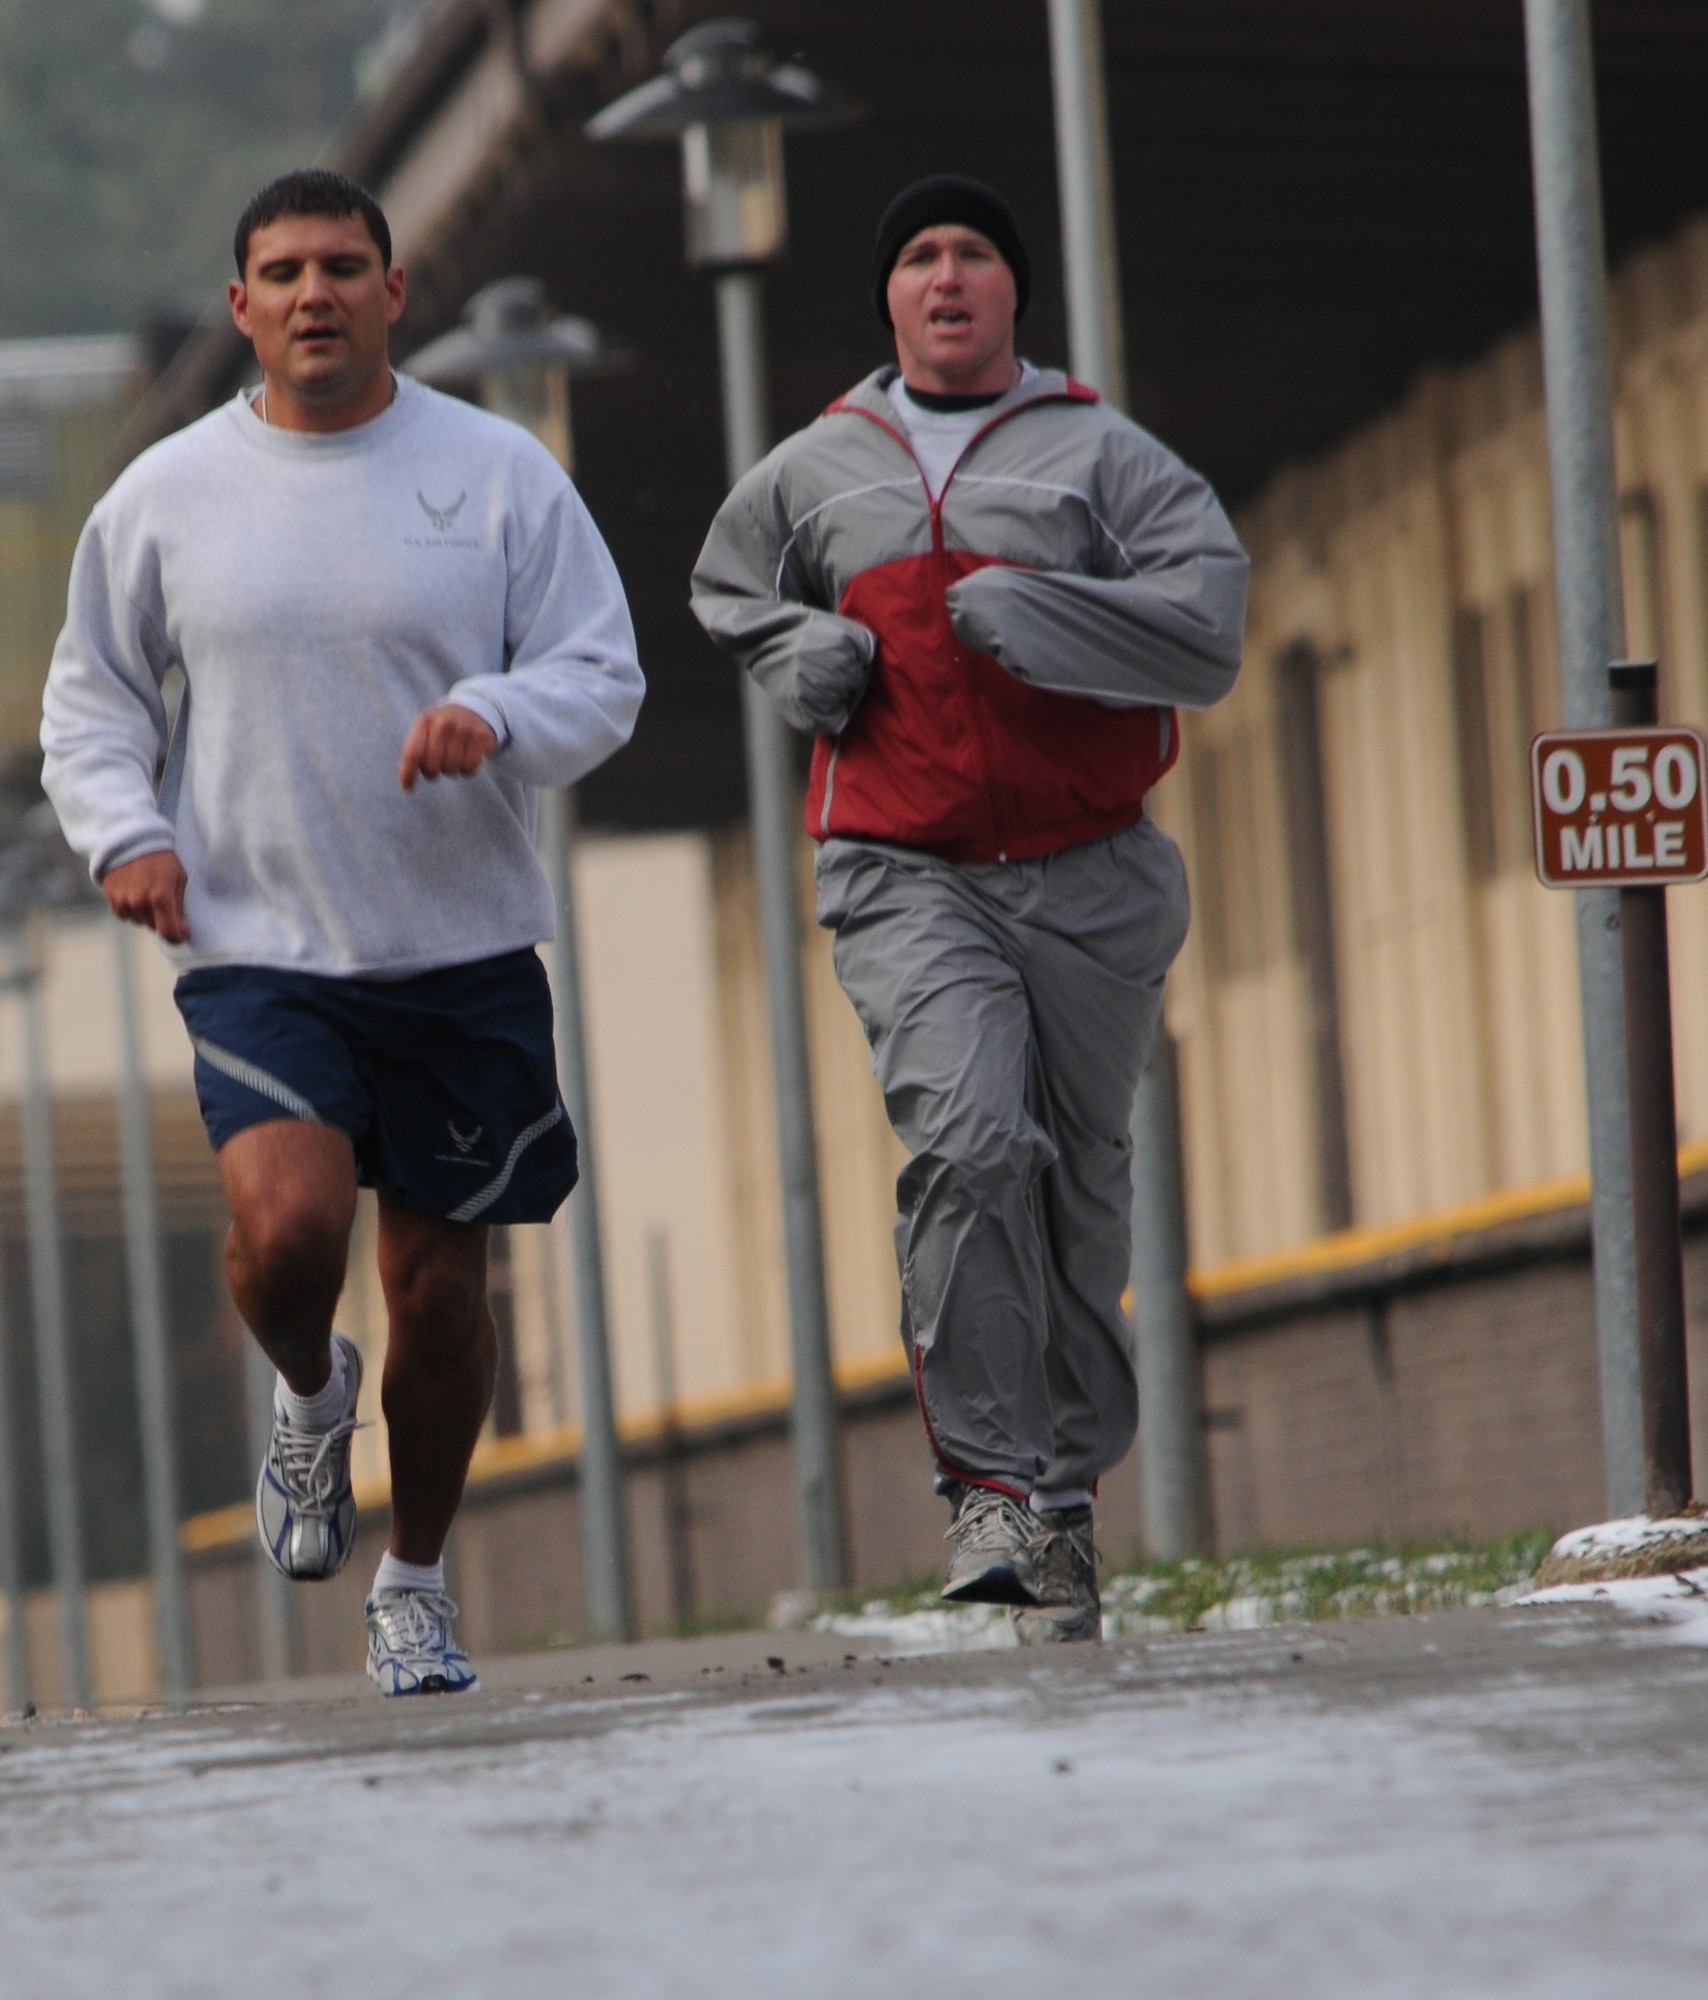 U.S. Air Force Tech. Sgt. Stephen Elizondo and Tech. Sgt. Mark Malloy, both 1st Communications Maintenance Squadron special communications team members run the 1.5 mile during their physical training assessment, Ramstein Air Base, Germany, Dec. 16, 2009. Airmen across the Air Force are getting ready for the new pt standards. (U.S. Air Force photo by Airman 1st Class Alexandria Mosness)